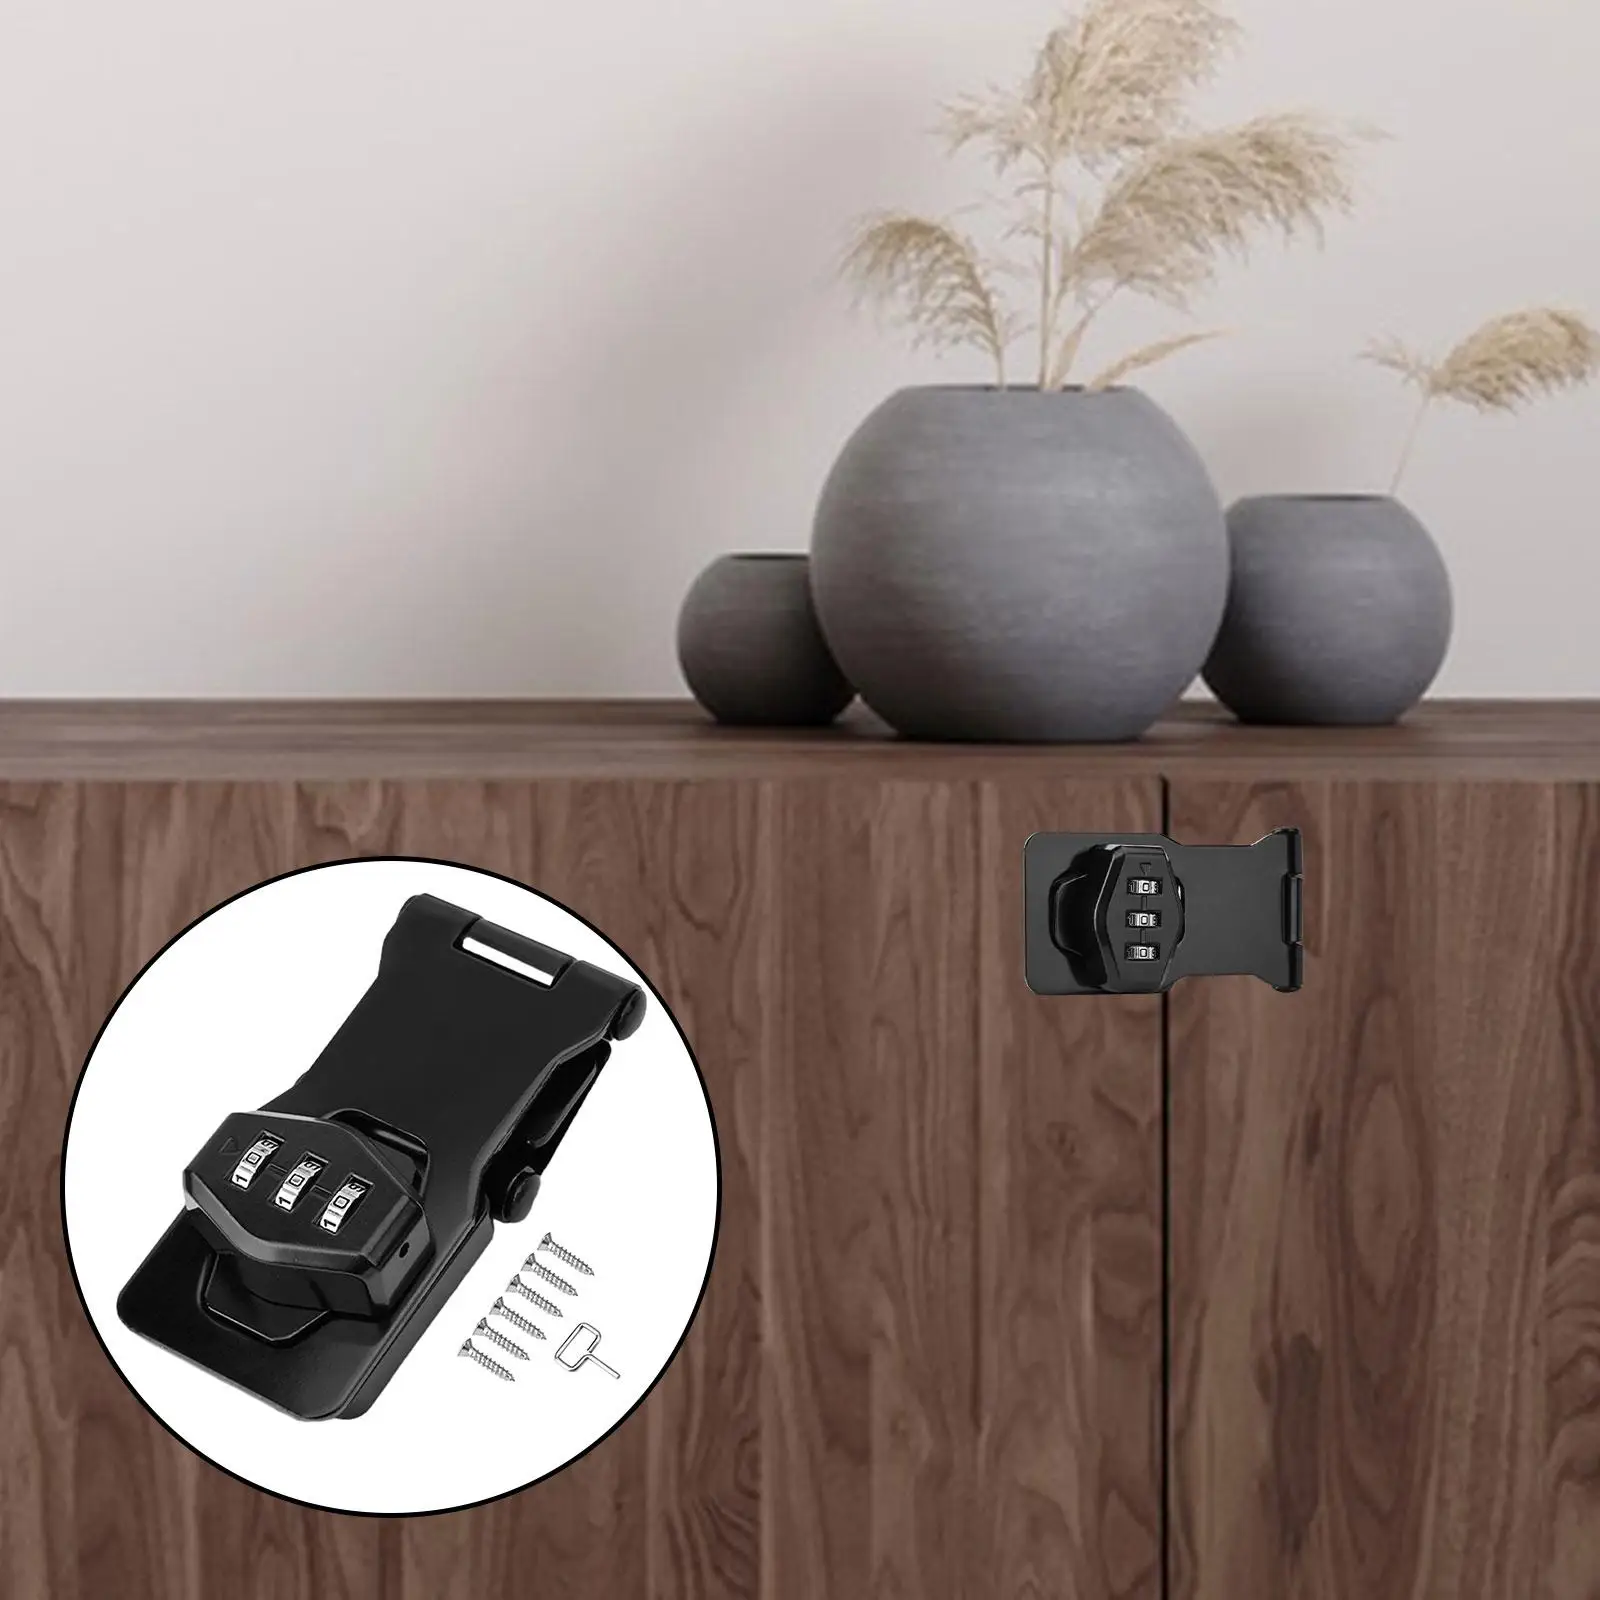 Cabinet Mechanical Combination Lock with Screws Accessory Keyless Lock for Sliding Door, Garage, Fence Easily Mounted